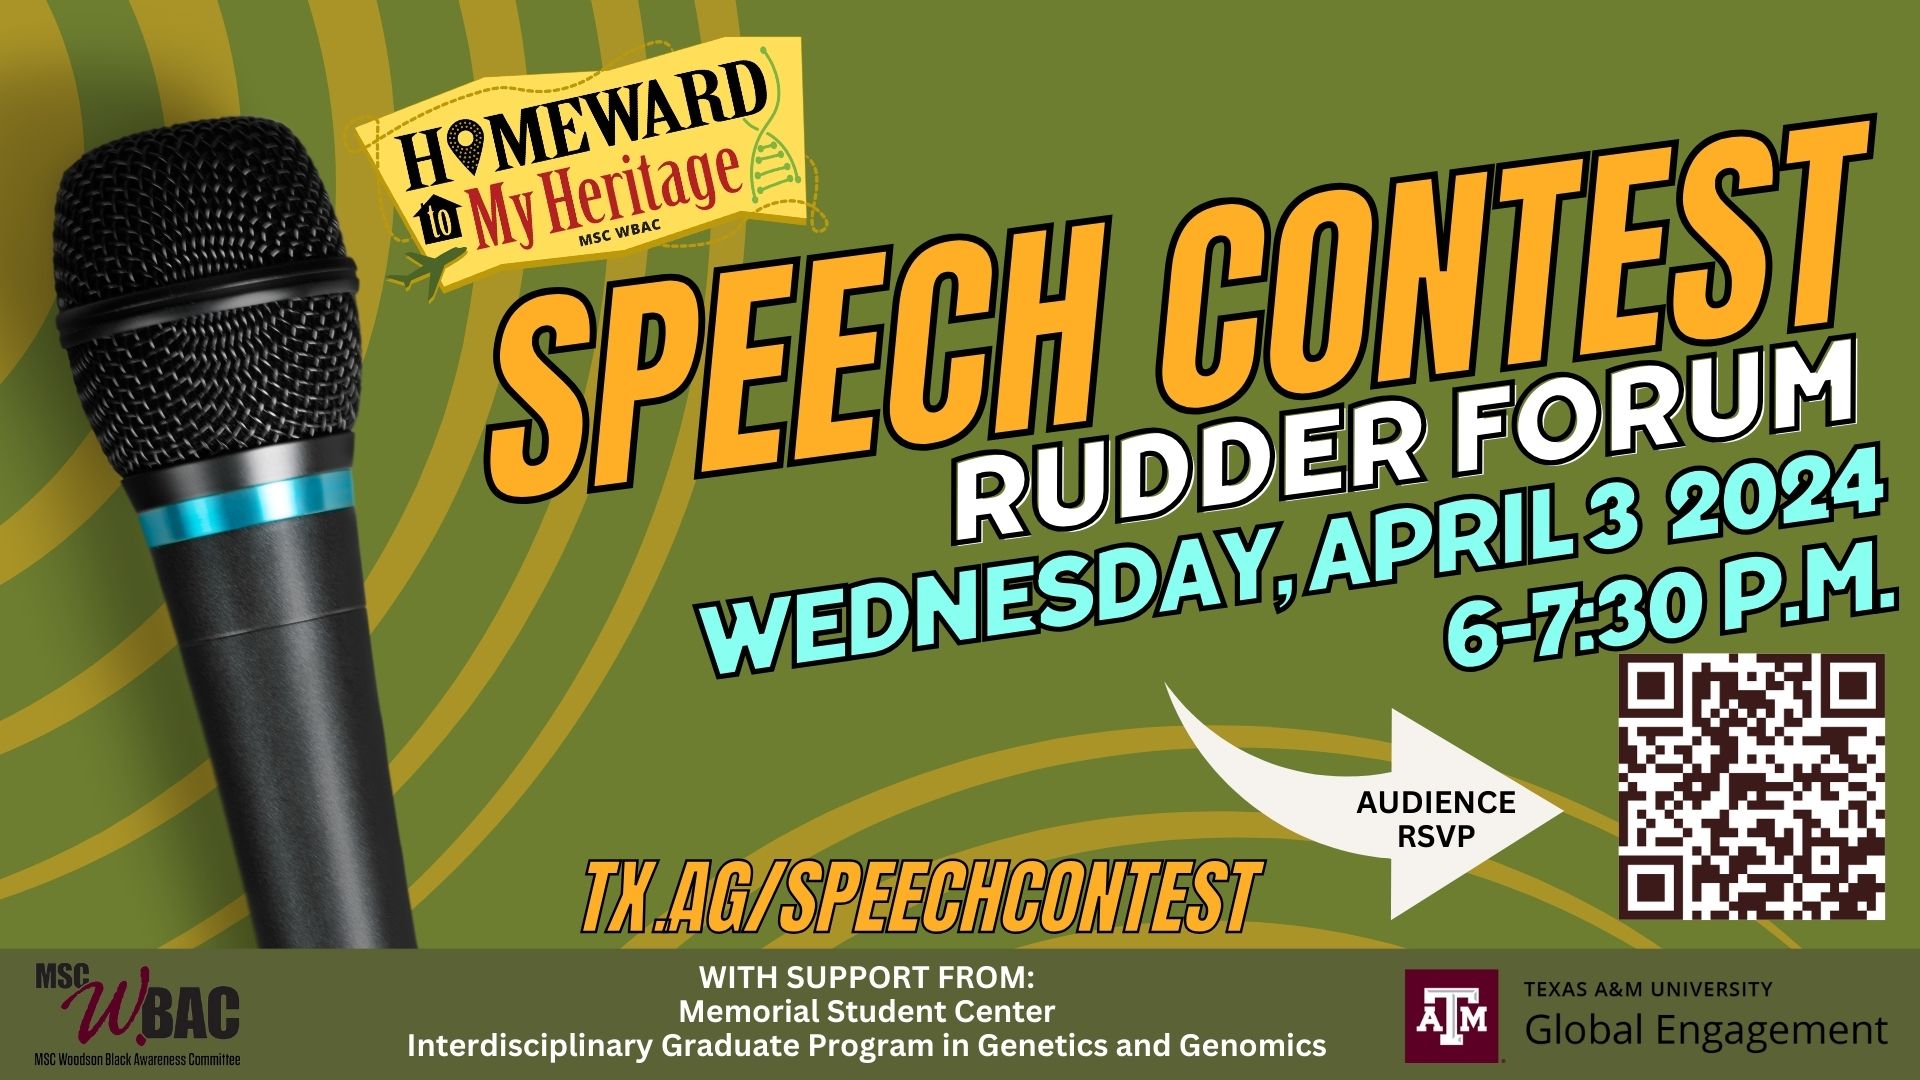 MSC WBAC, Global Engagement and Interdisciplinary Graduate Program in Genetics and Genomics present Homeward to my Heritage, Speech Contest. Wednesday, April 3, 2024 from 6 to 7:30 p.m. at the Rudder Forum. RSVP: tx.ag/speechcontest